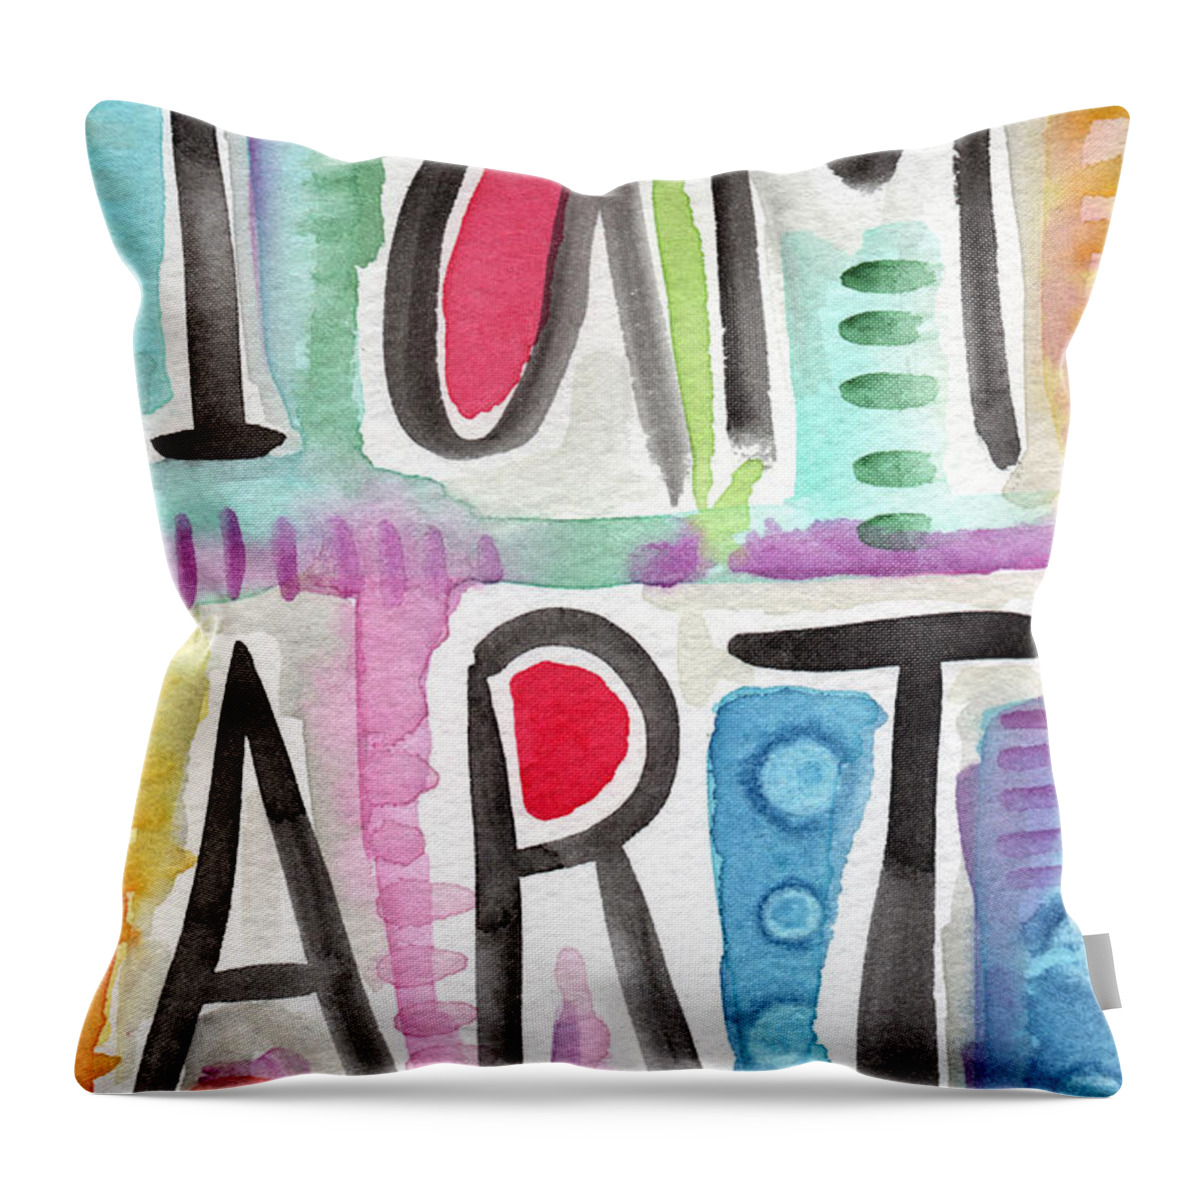 I Am Art Throw Pillow featuring the painting I Am ART by Linda Woods